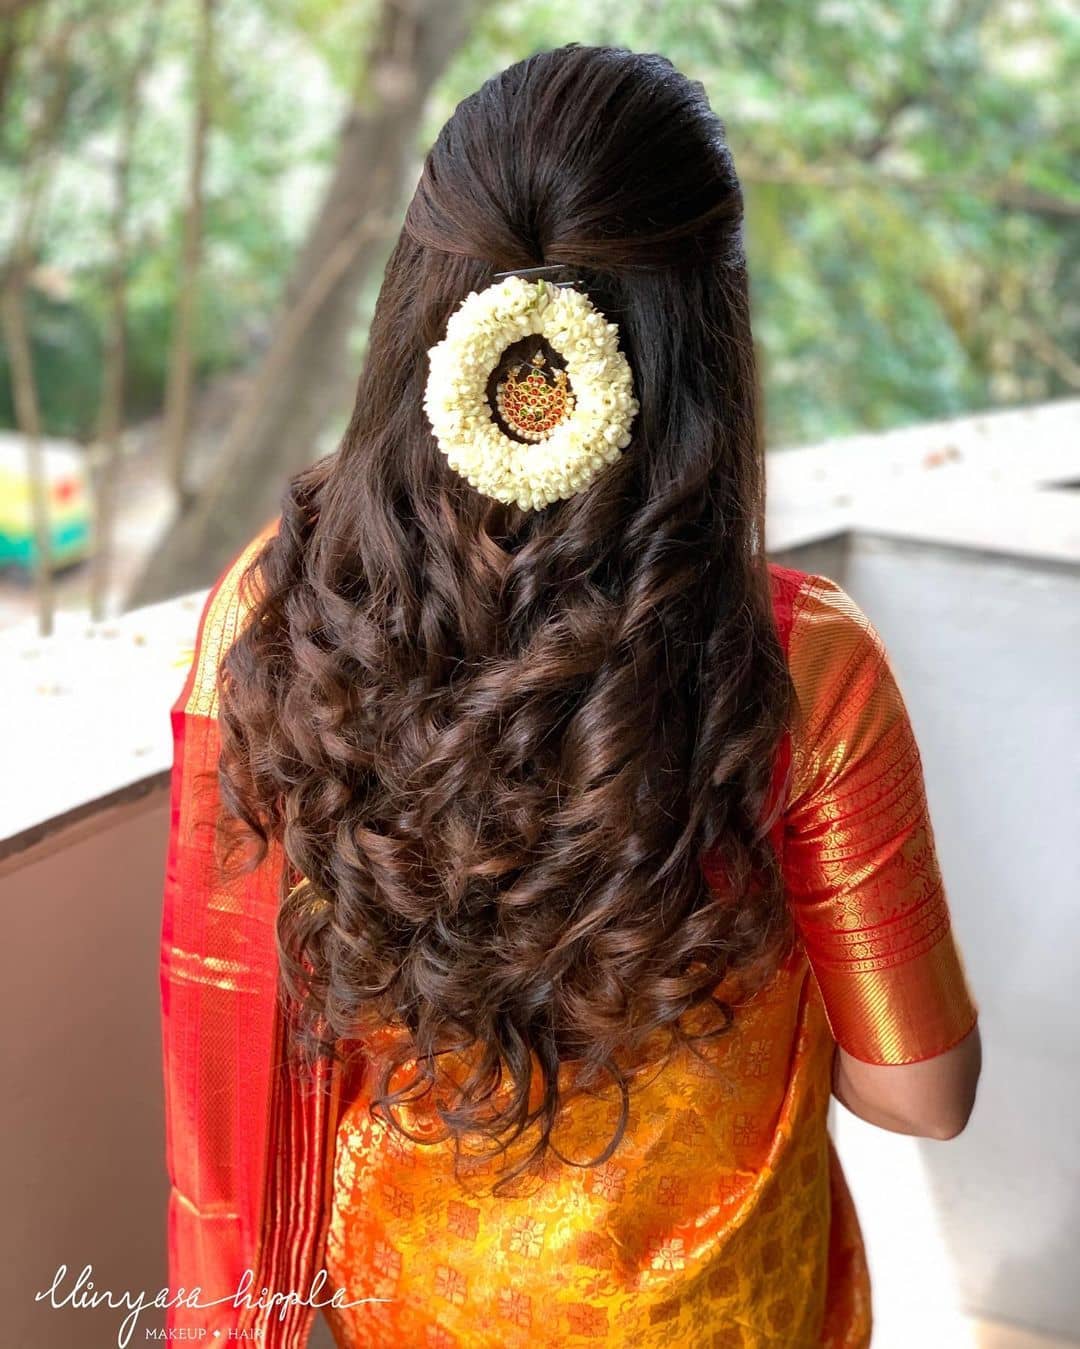 What kind of hairstyles and accessories will look good for a silk saree for  making the face look slimmer? - Quora